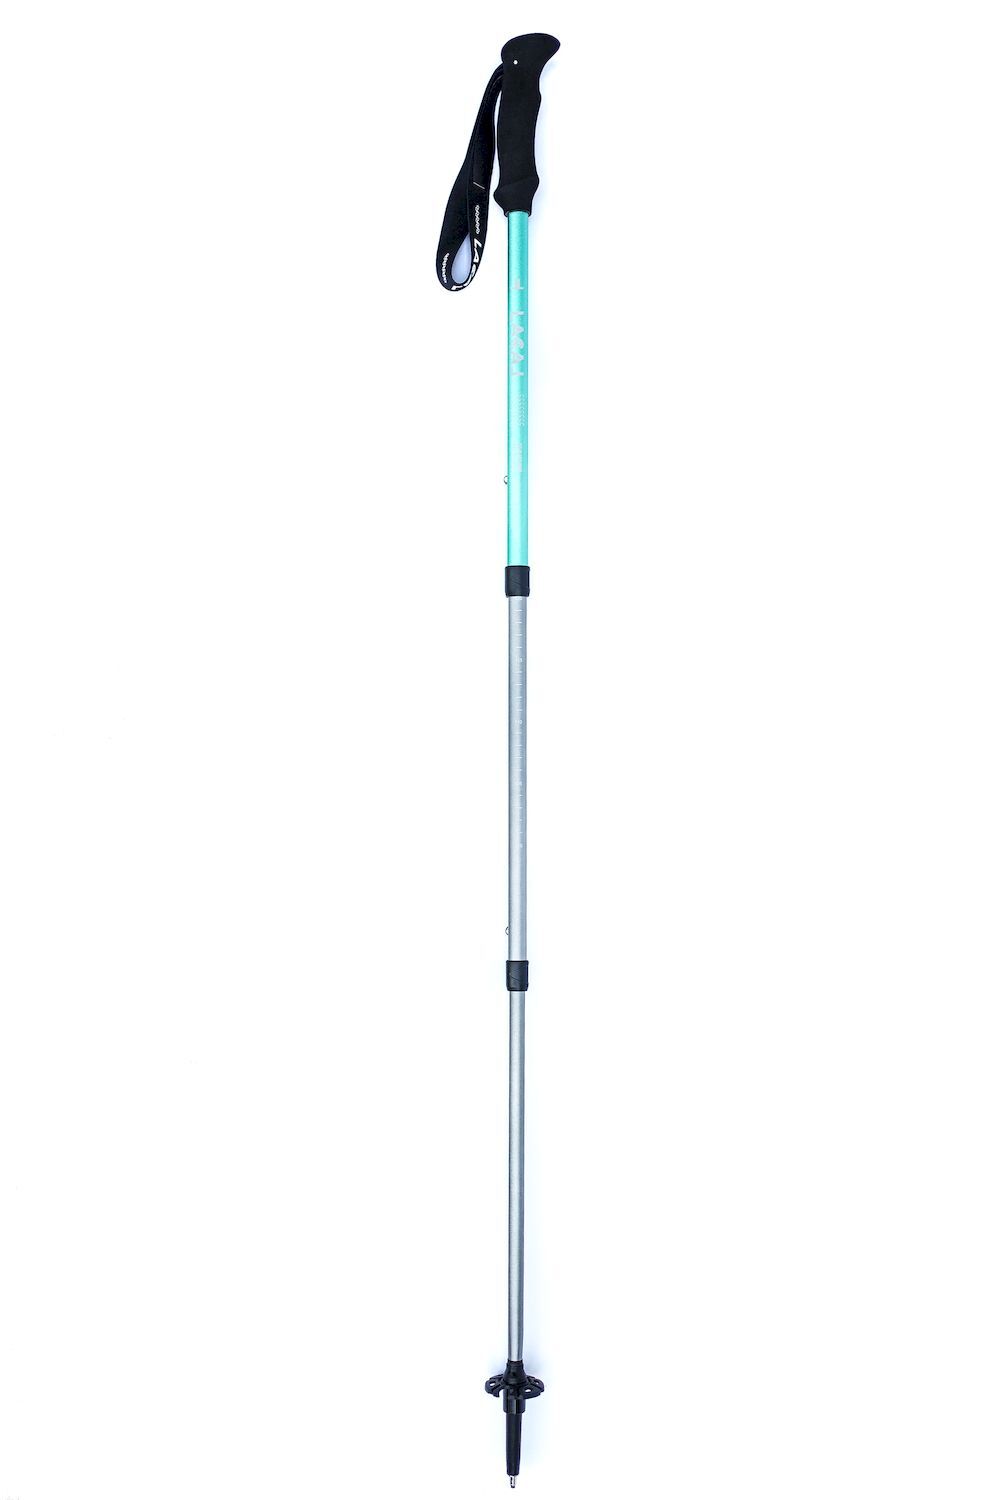 Lacal Two Clic - Walking poles